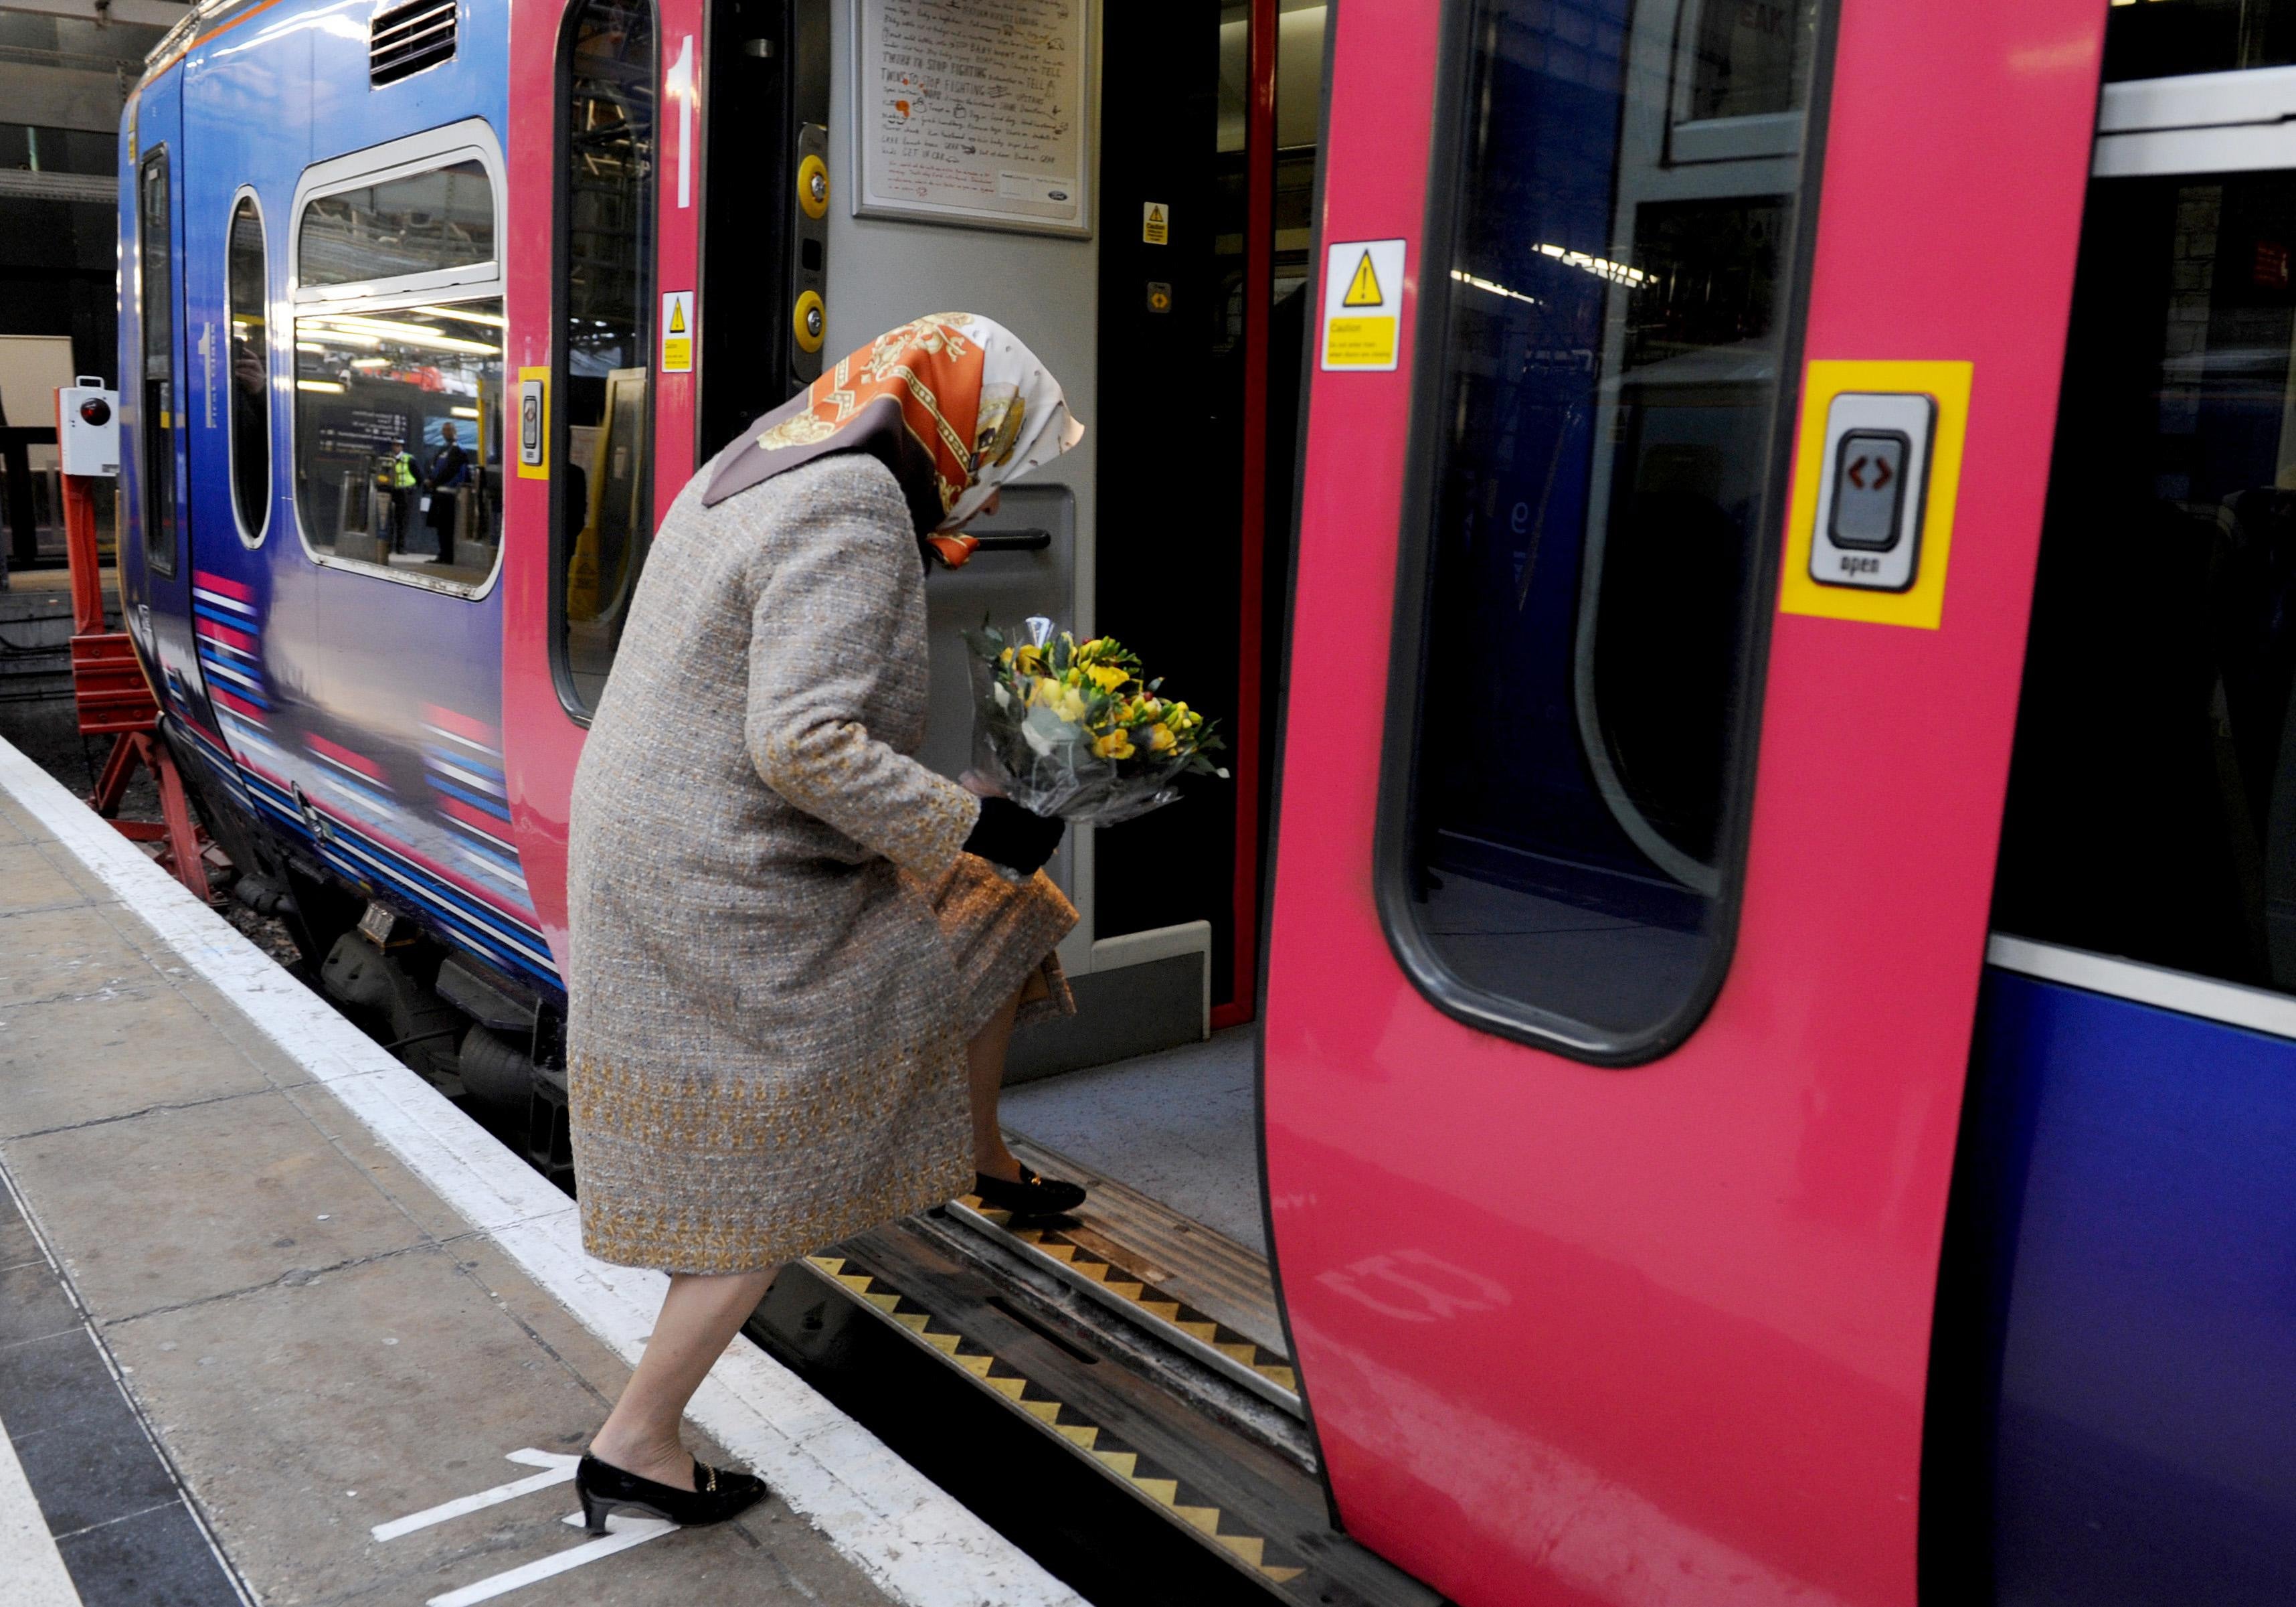 Queen Elizabeth boards a scheduled train at Kings Cross station in London, 2009